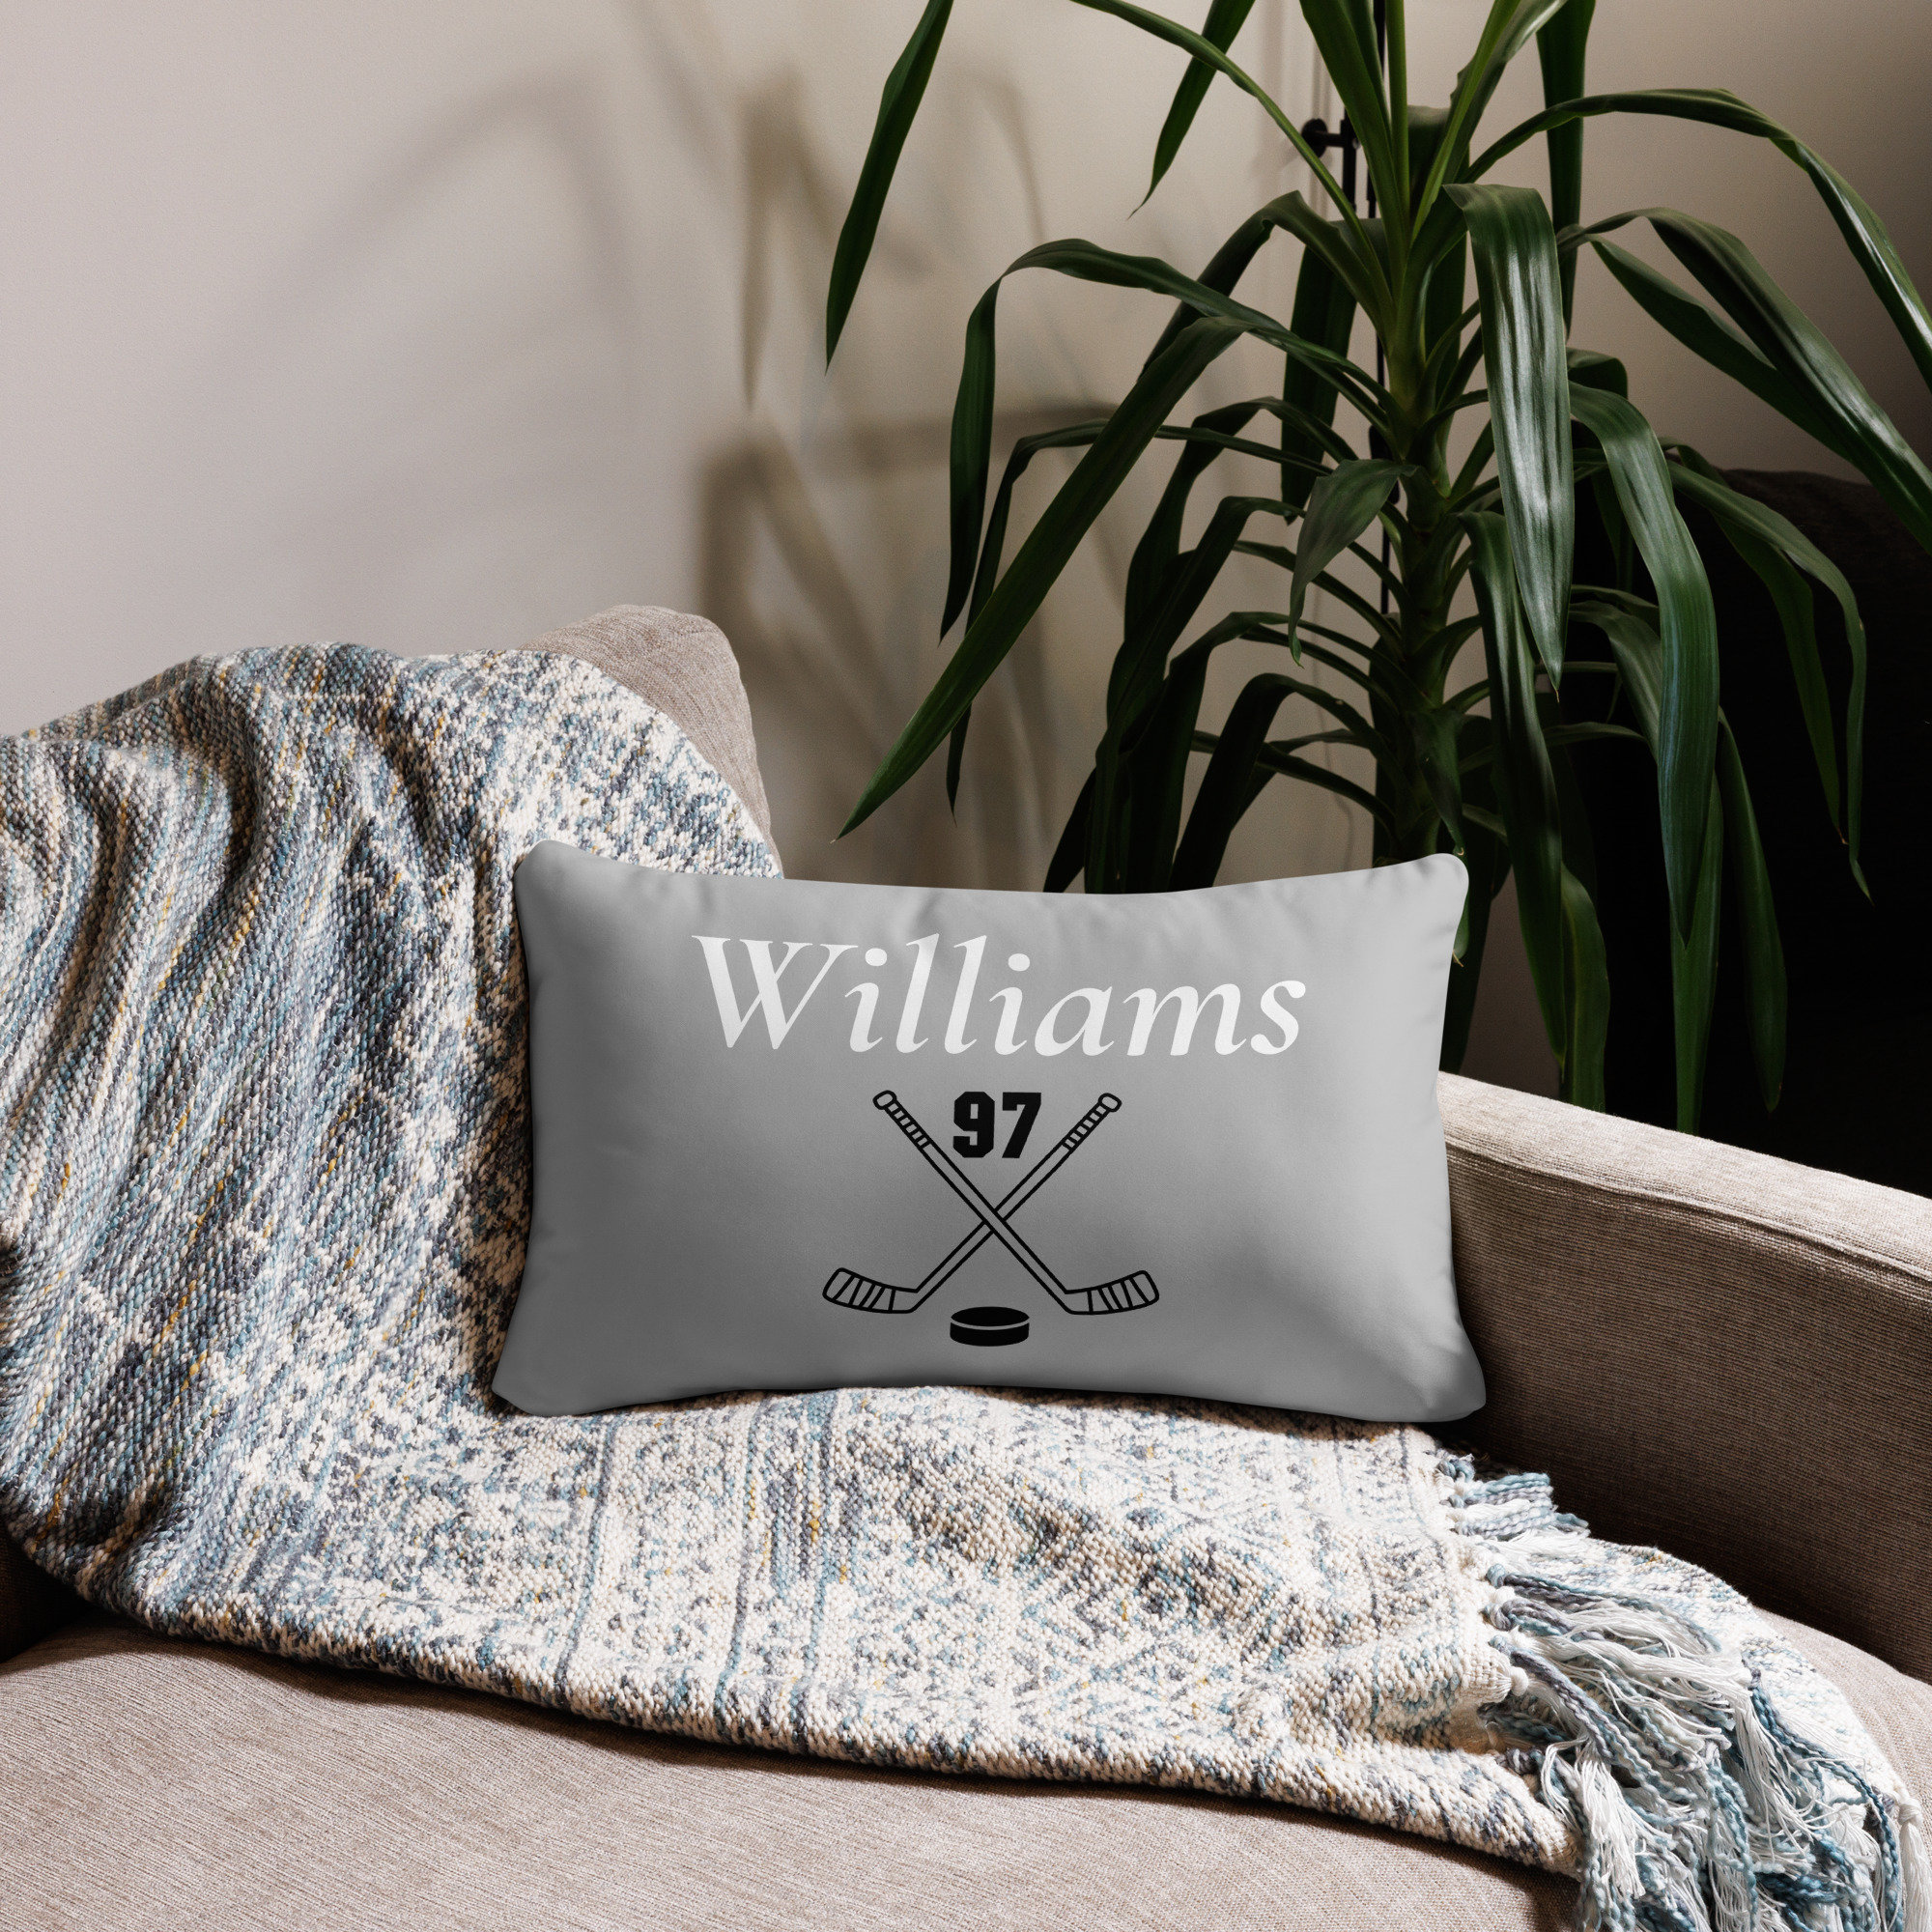 Hockey Theme Decorative Throw Pillow Cover Personalized